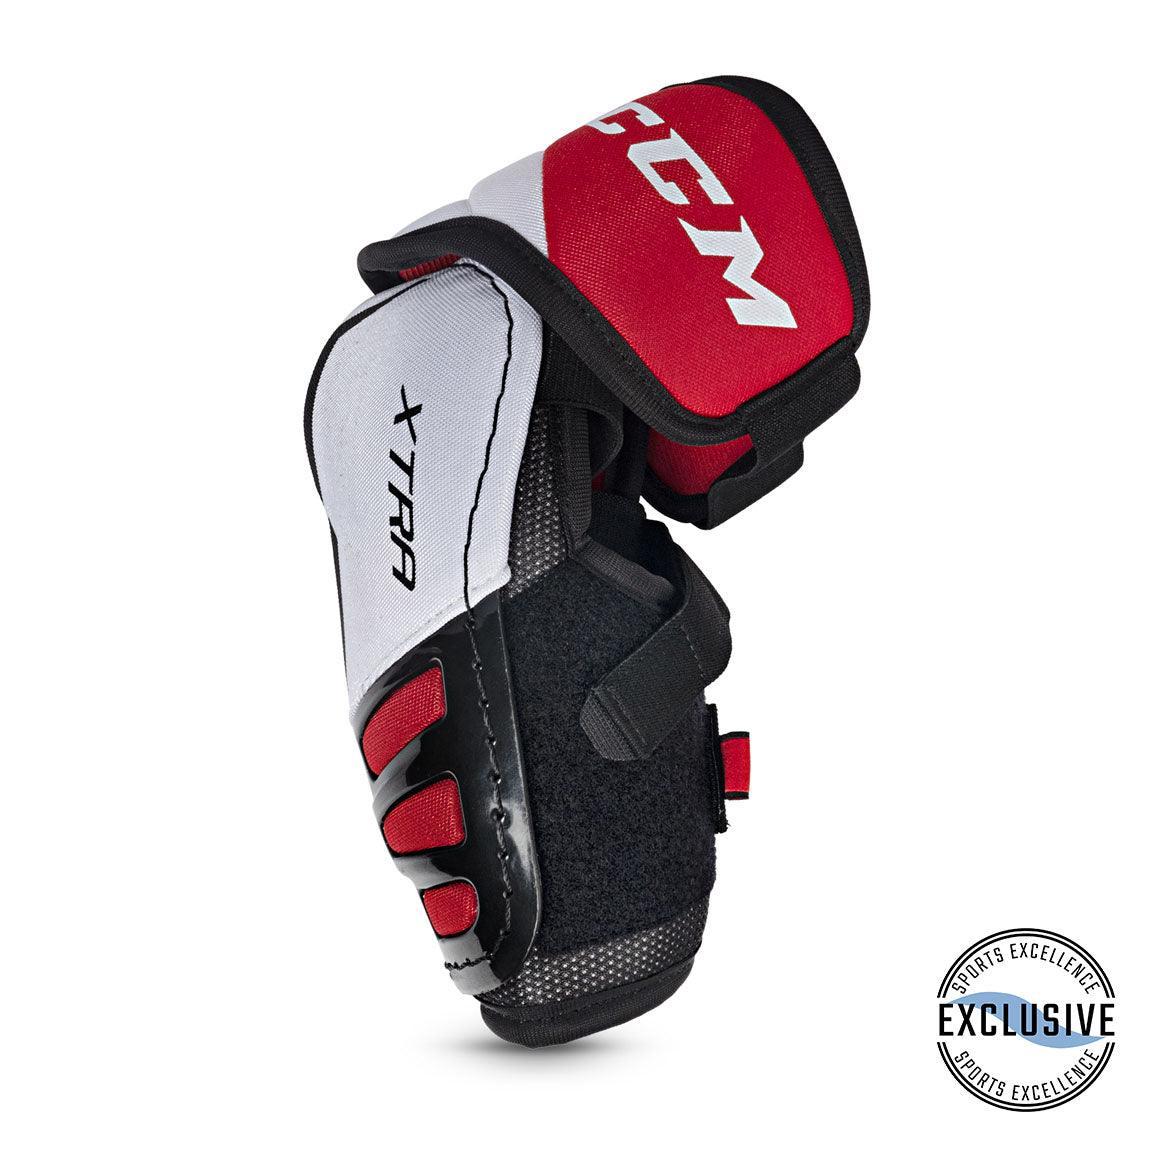 JetSpeed Xtra Elbow Pads - Senior - Sports Excellence